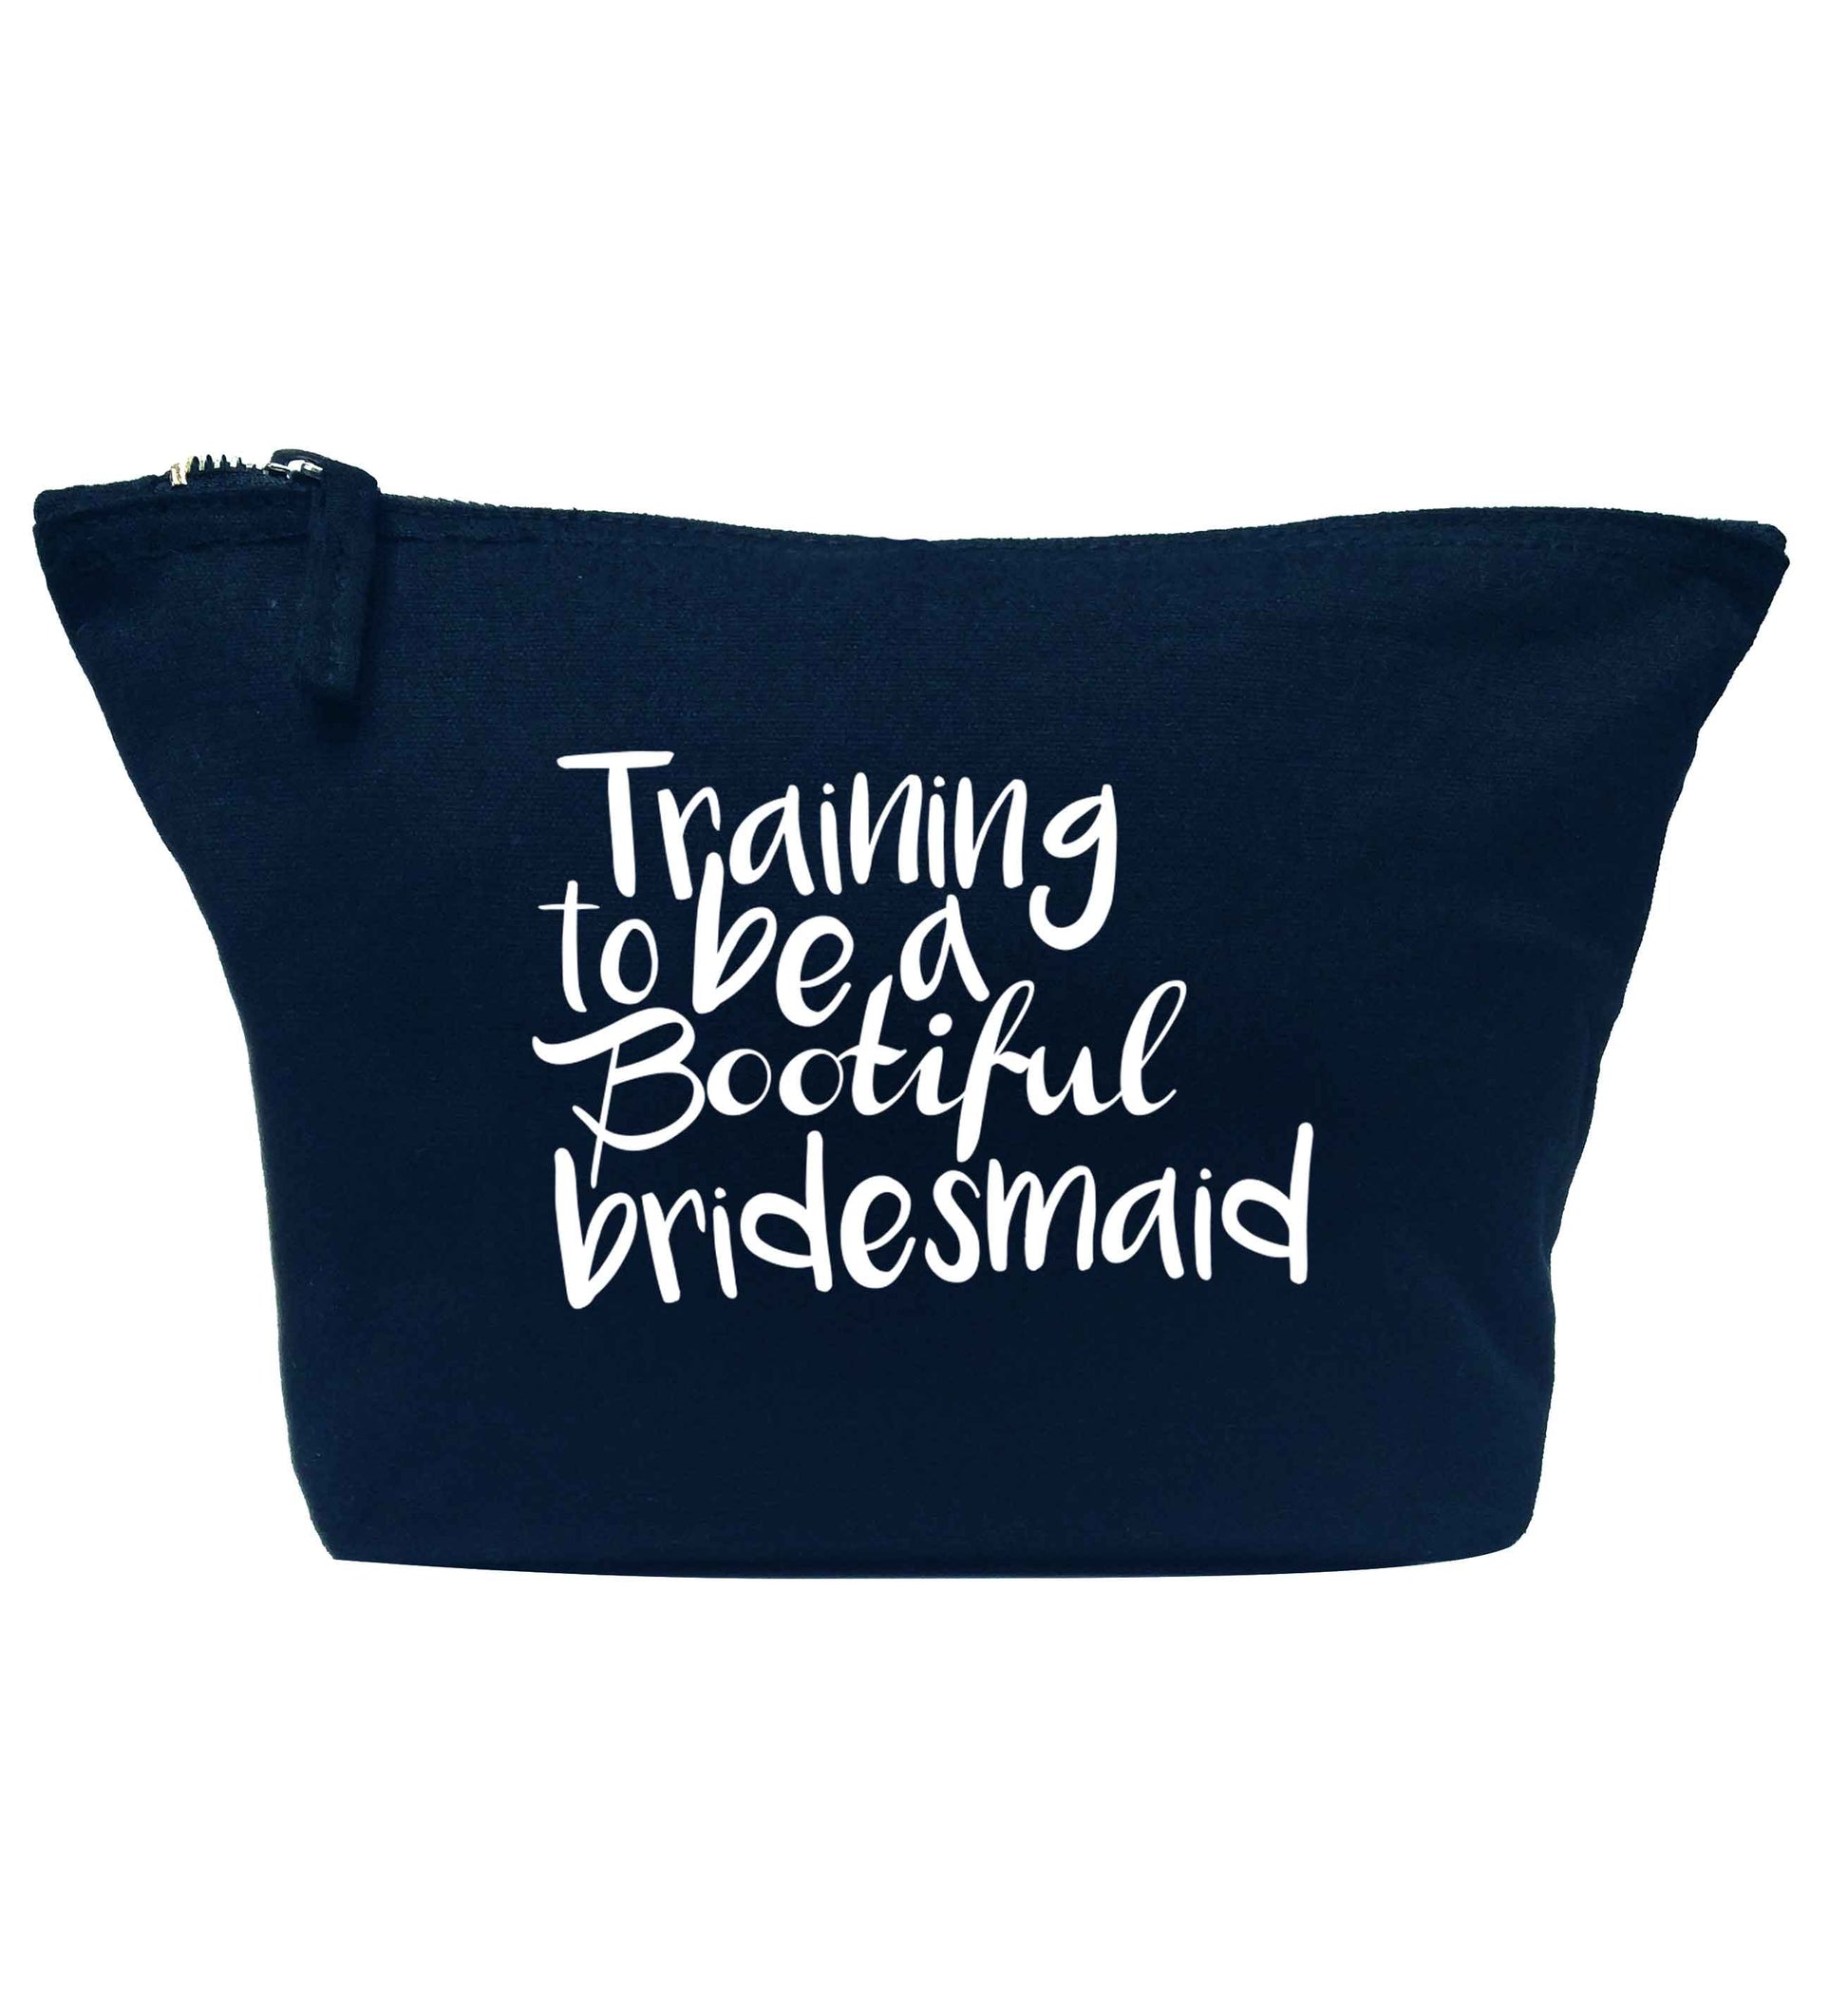 Get motivated and get fit for your big day! Our workout quotes and designs will get you ready to sweat! Perfect for any bride, groom or bridesmaid to be!  navy makeup bag